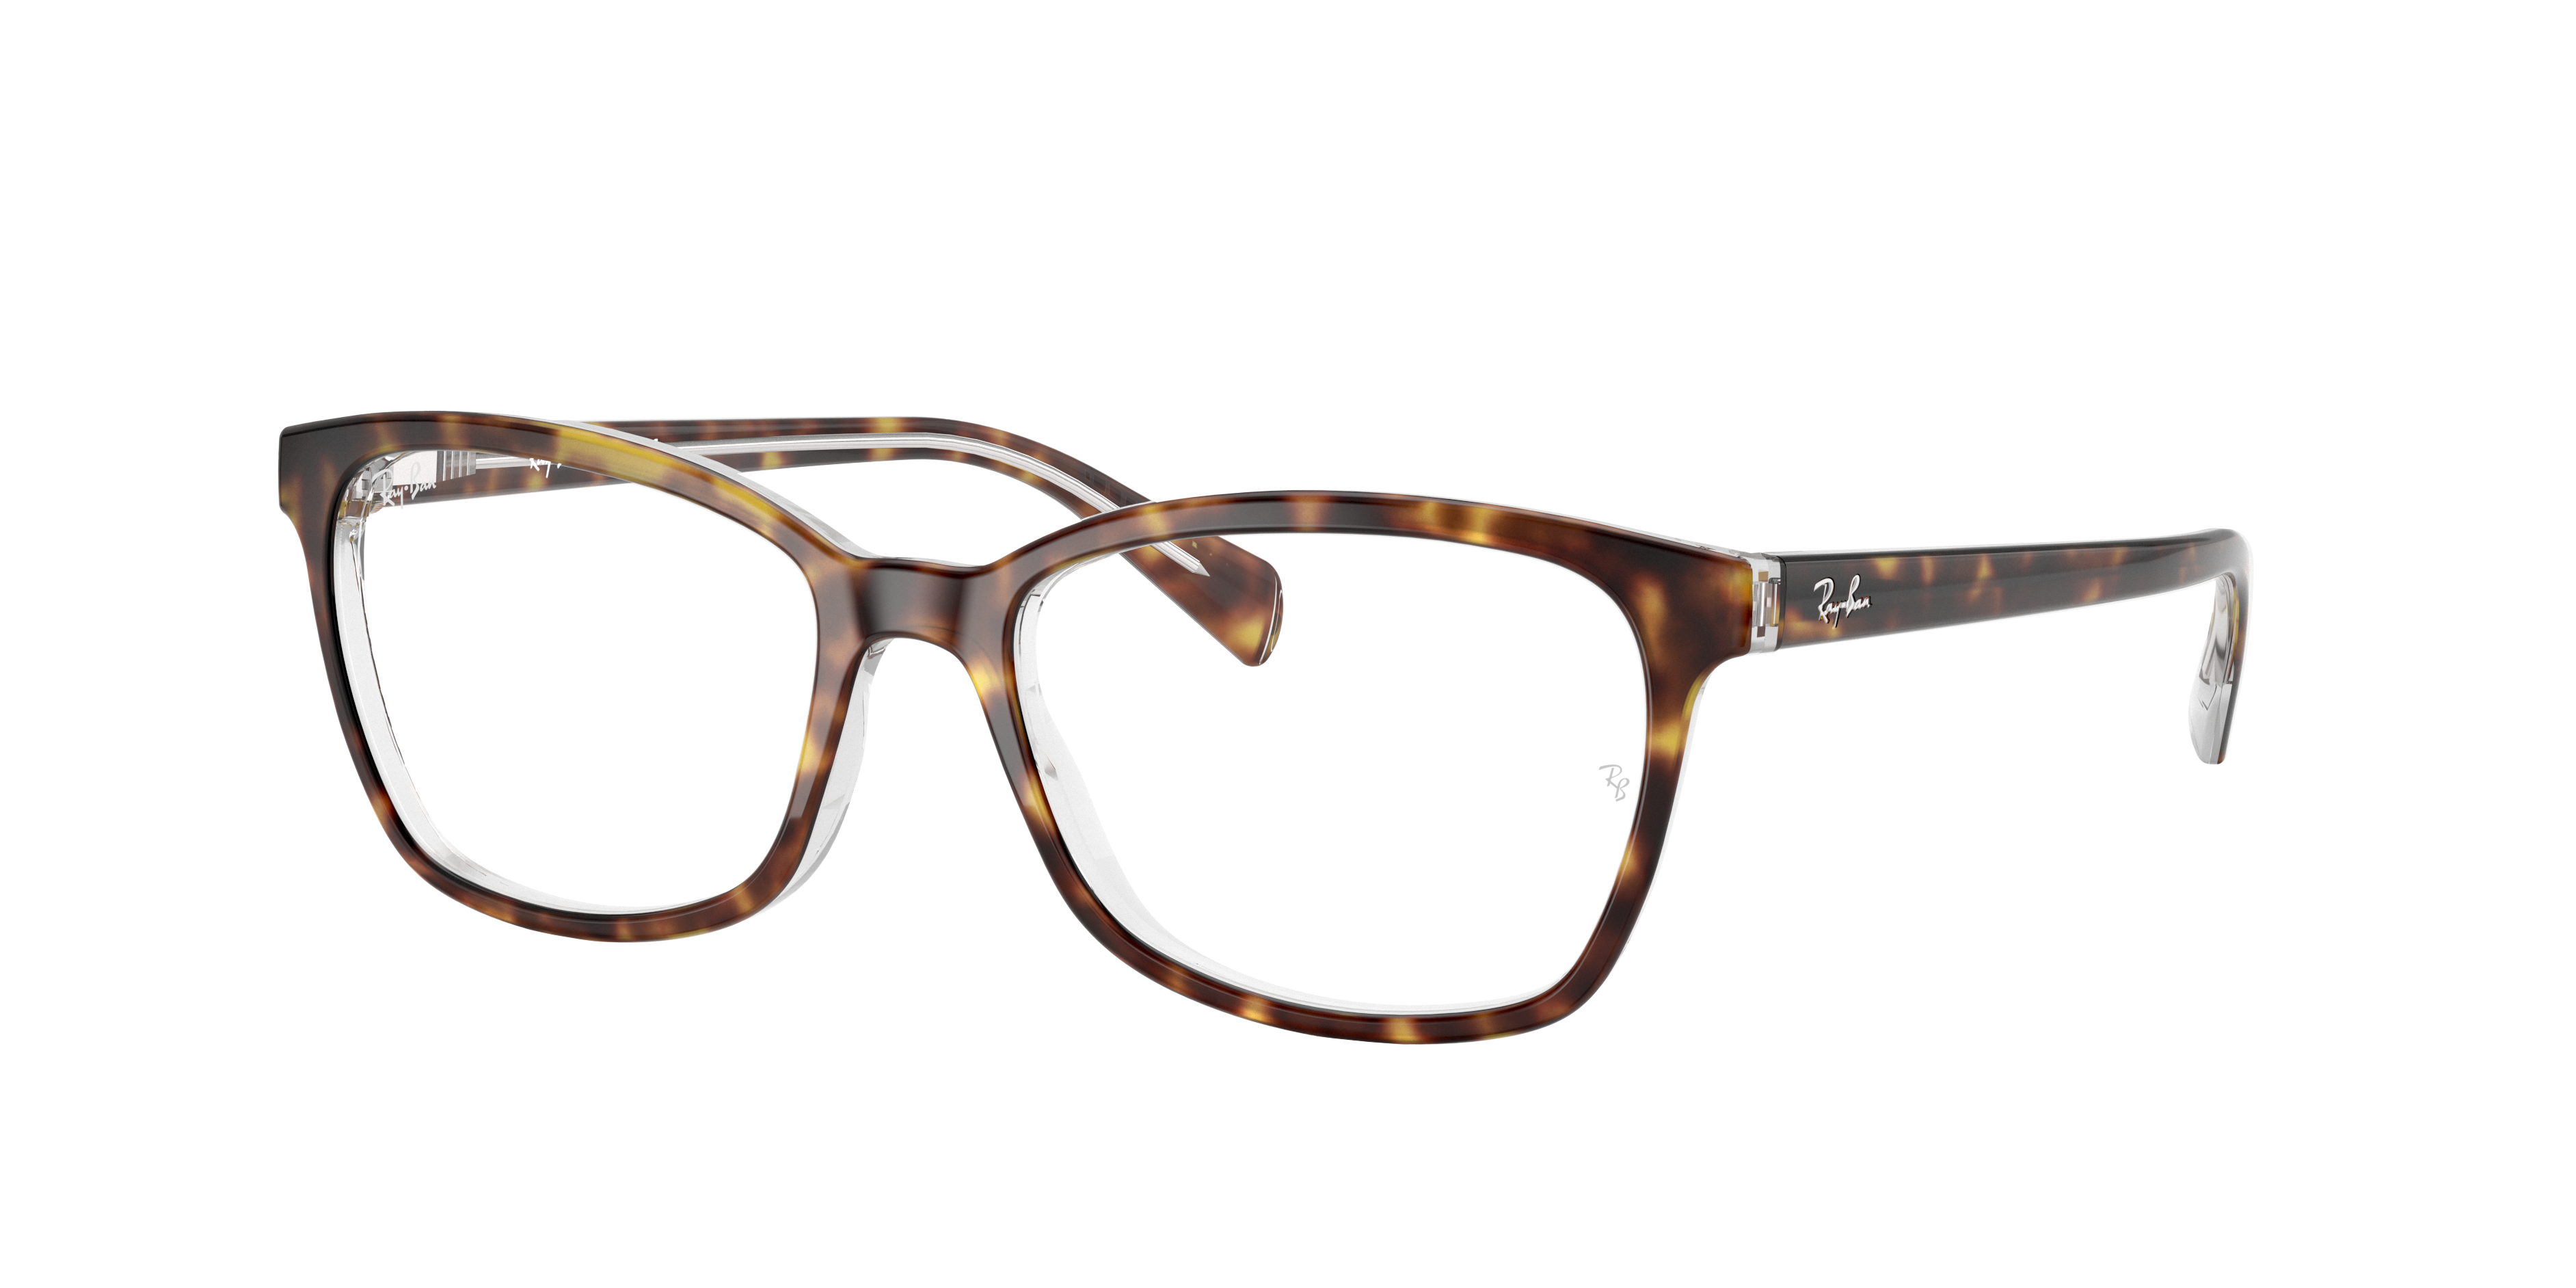 Ray-Ban 0RX5362 Glasses in Tortoise 